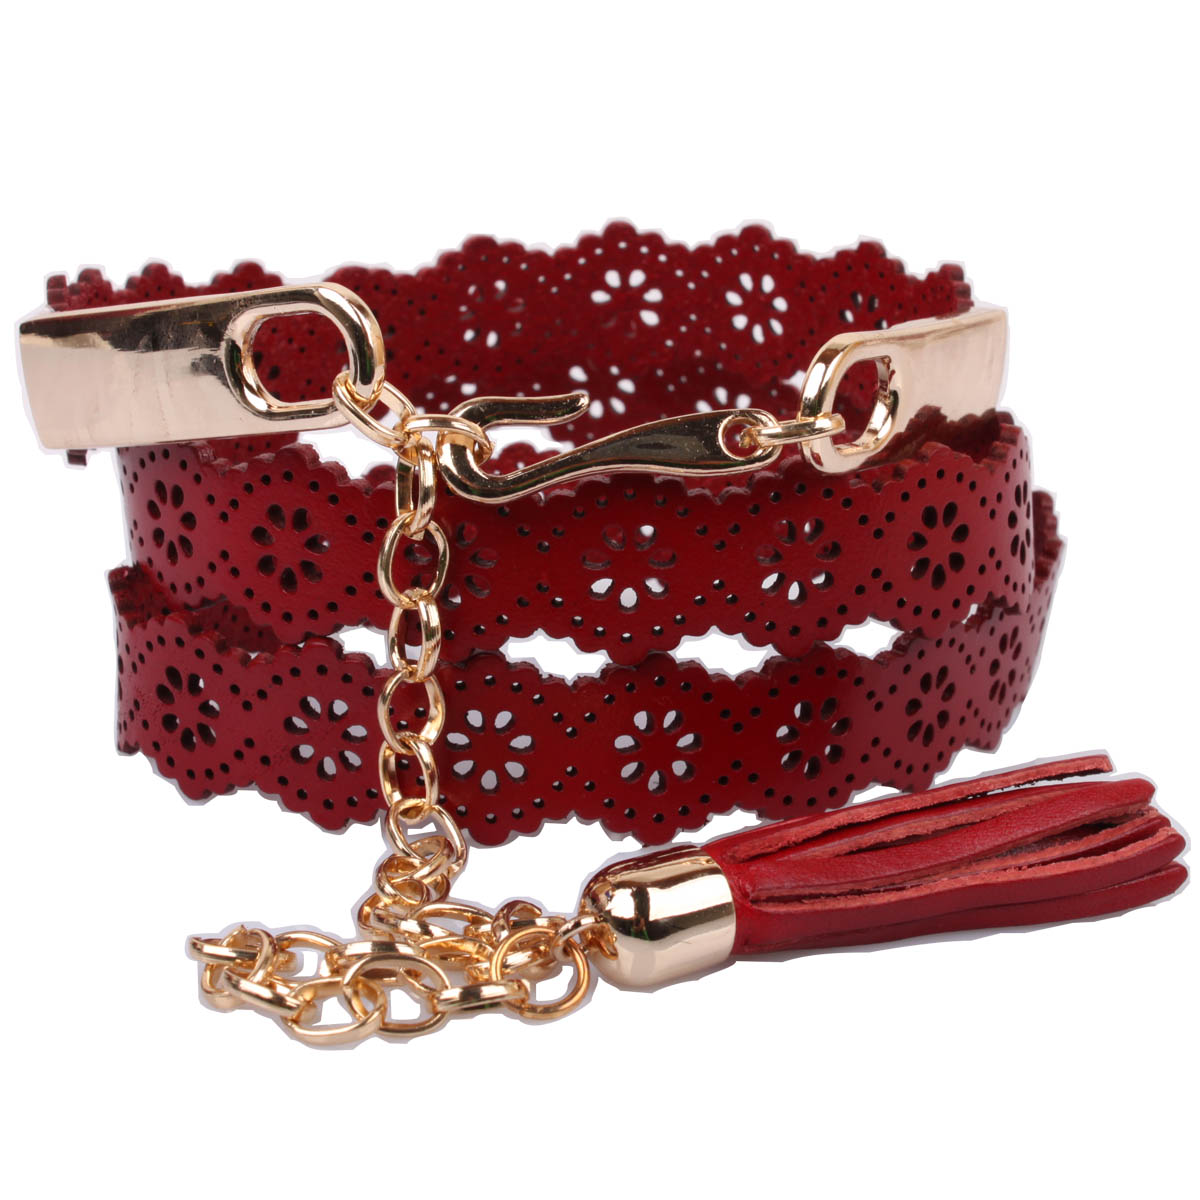 Belt female genuine leather sweet first layer of cowhide strap laciness casual empty thread tassel